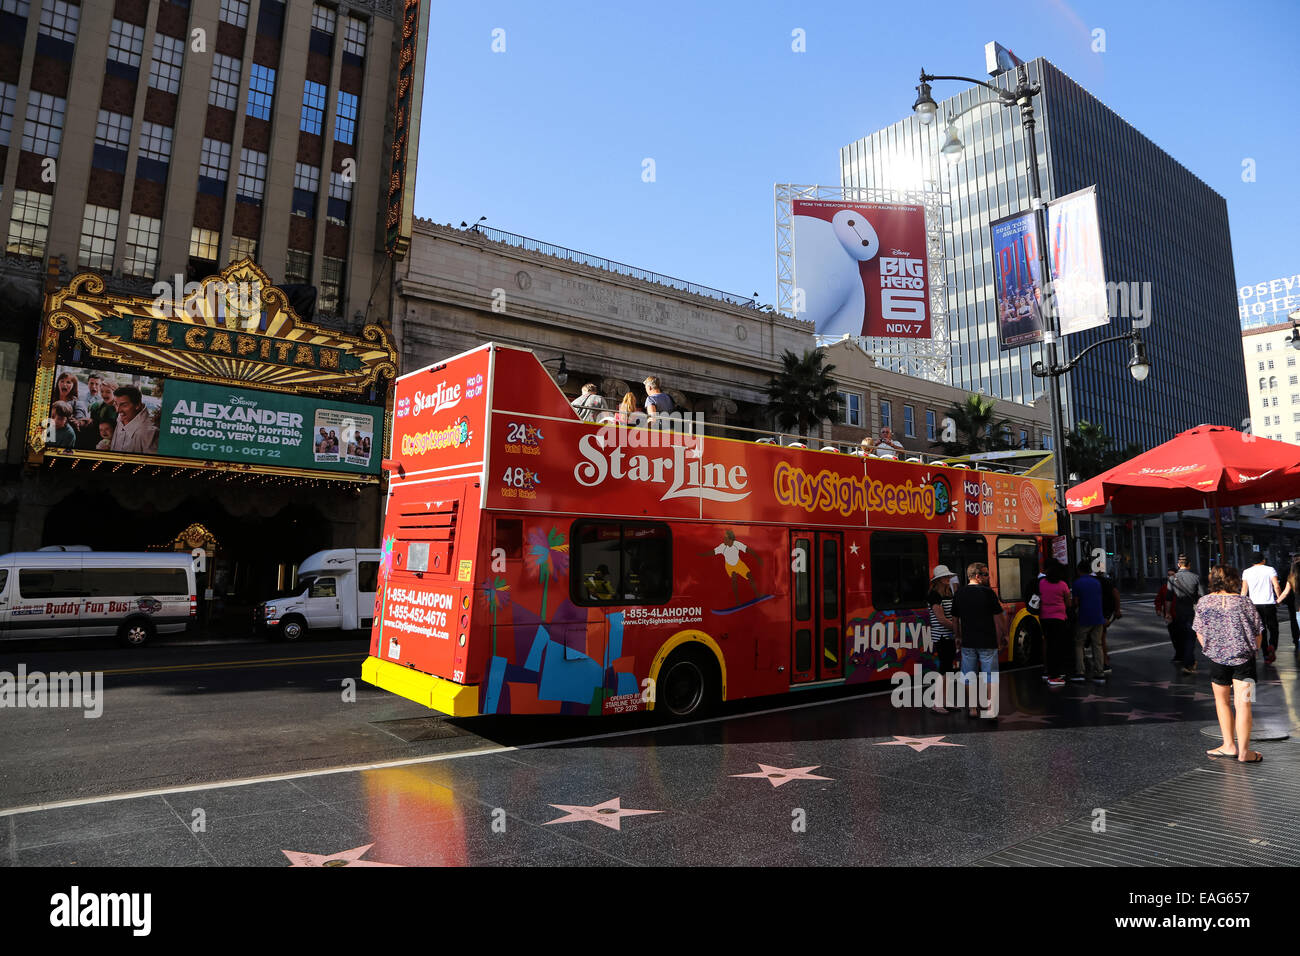 Starline City Sightseeing Tours bus in Hollywood, Los Angeles, California Stock Photo